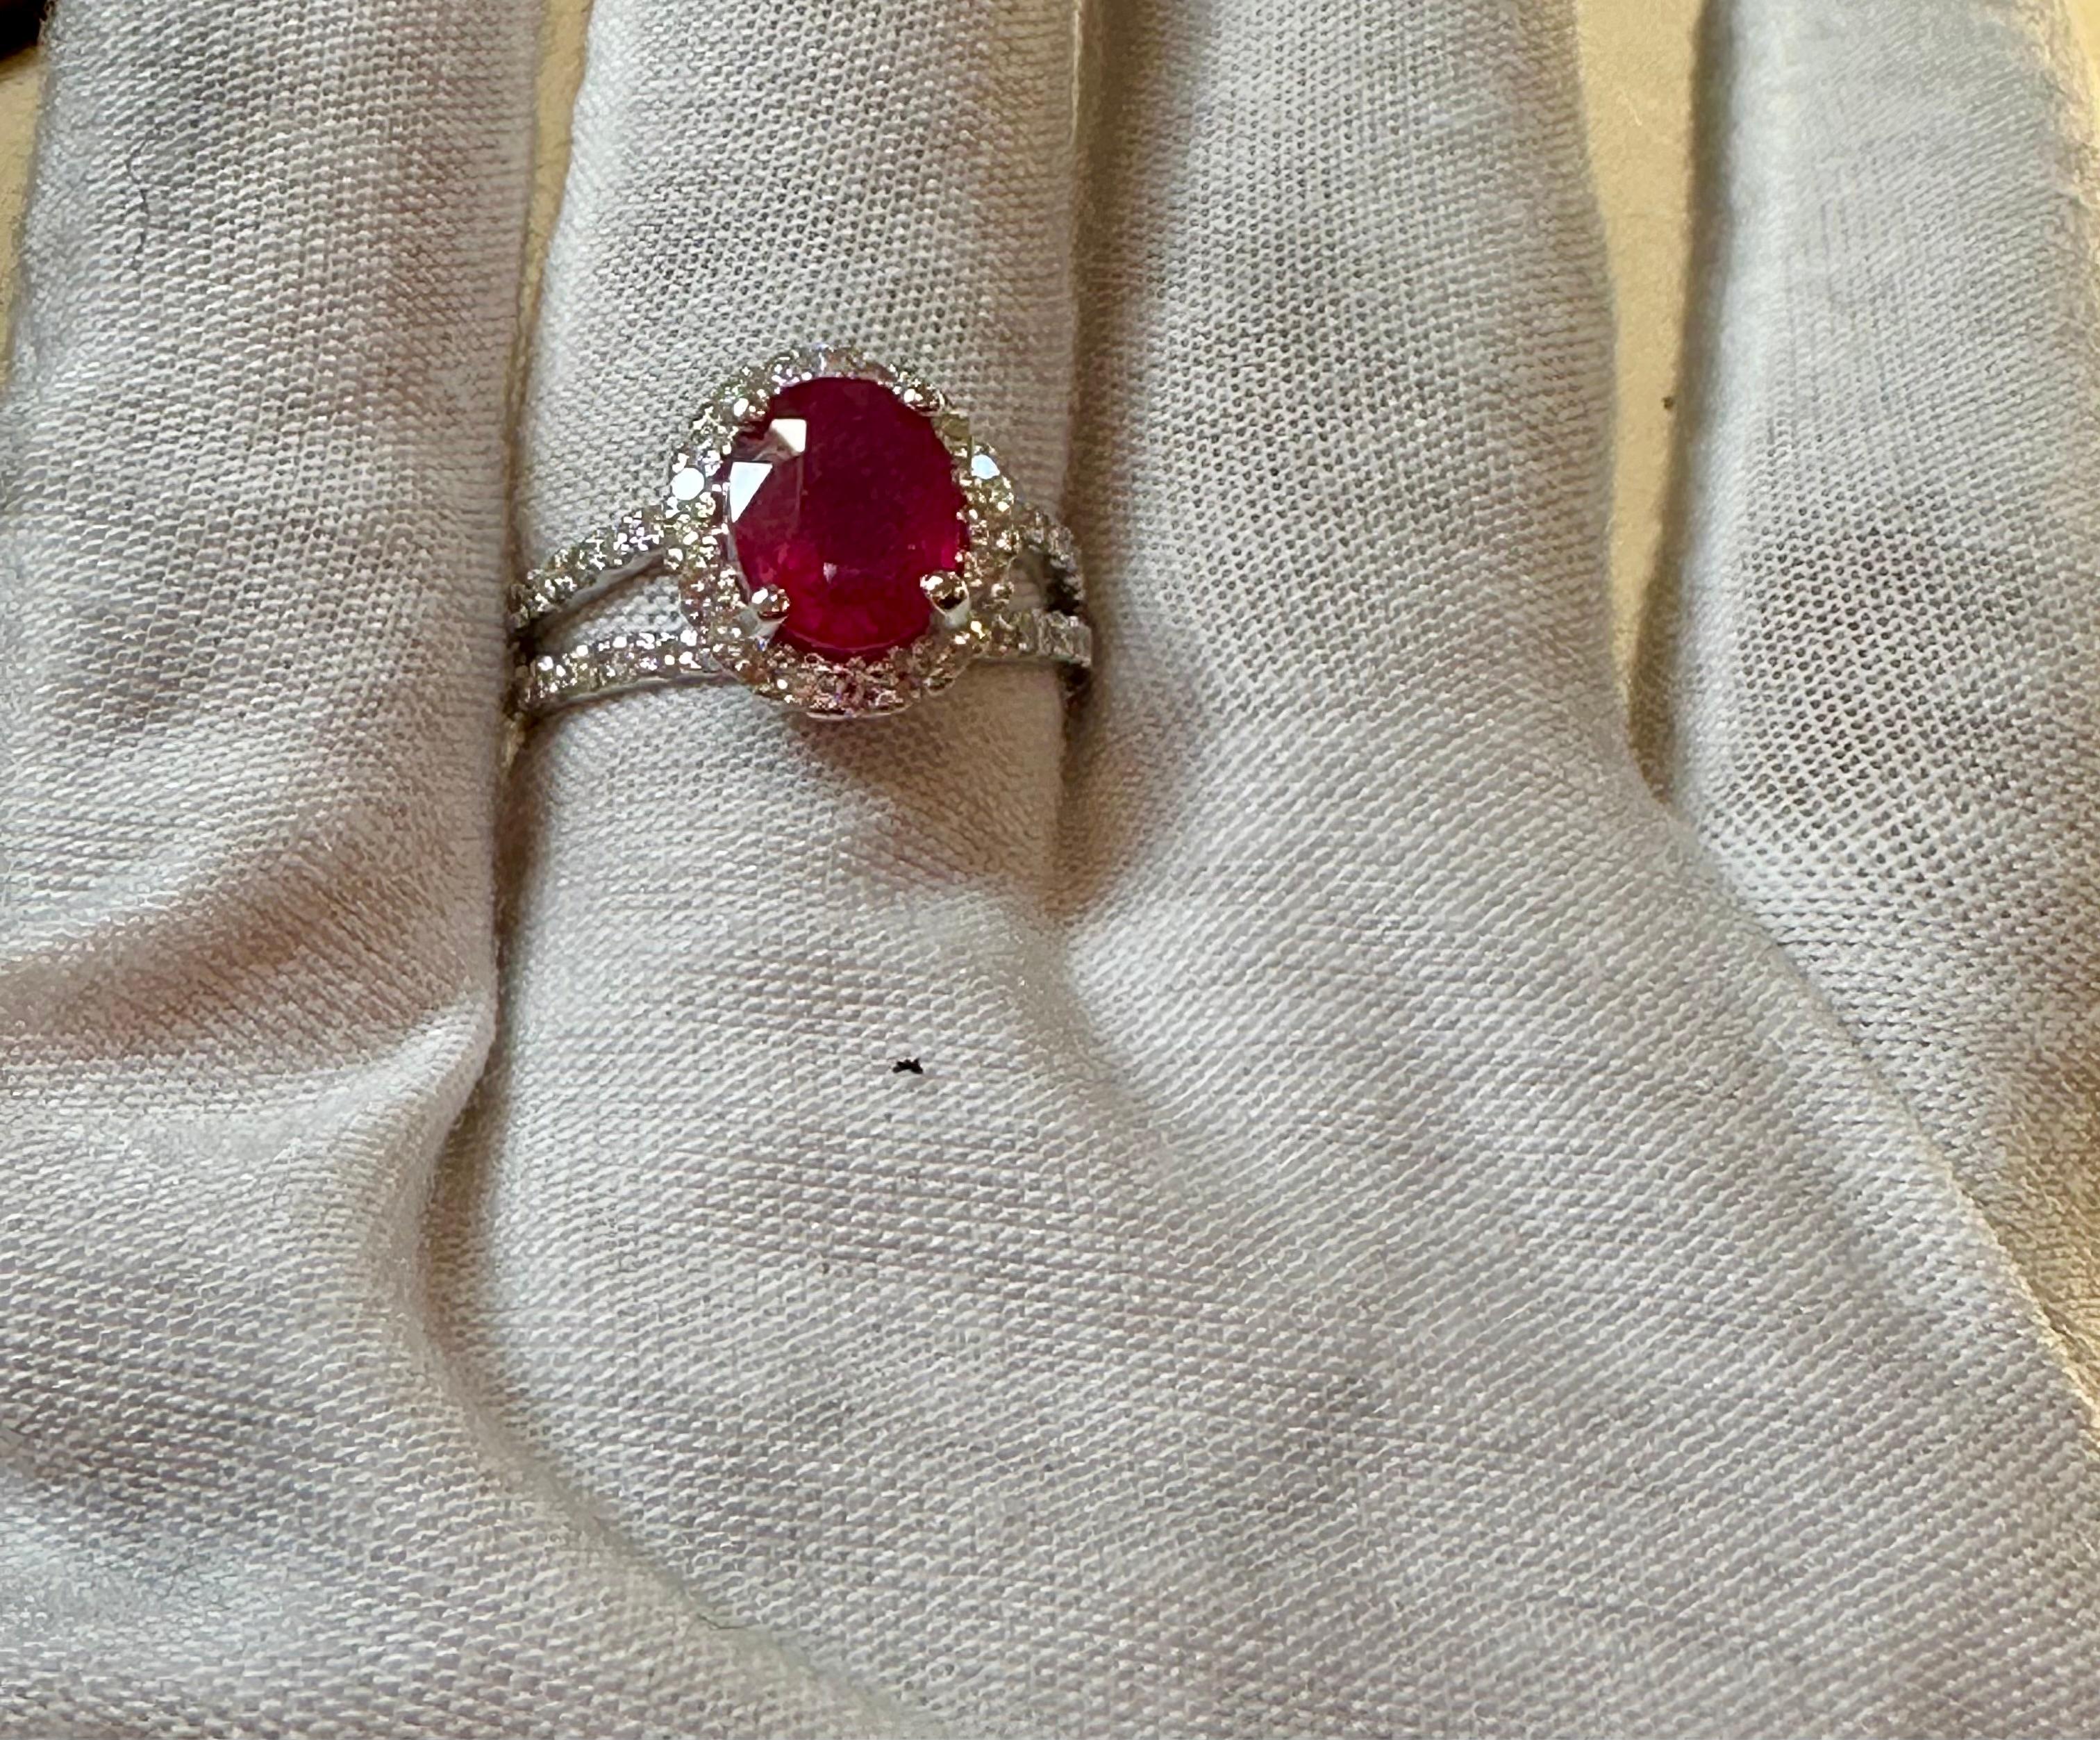 2.5 Carat Oval Treated Ruby & 2 ct Diamond Ring 14 Karat White Gold Size 7 In New Condition For Sale In New York, NY